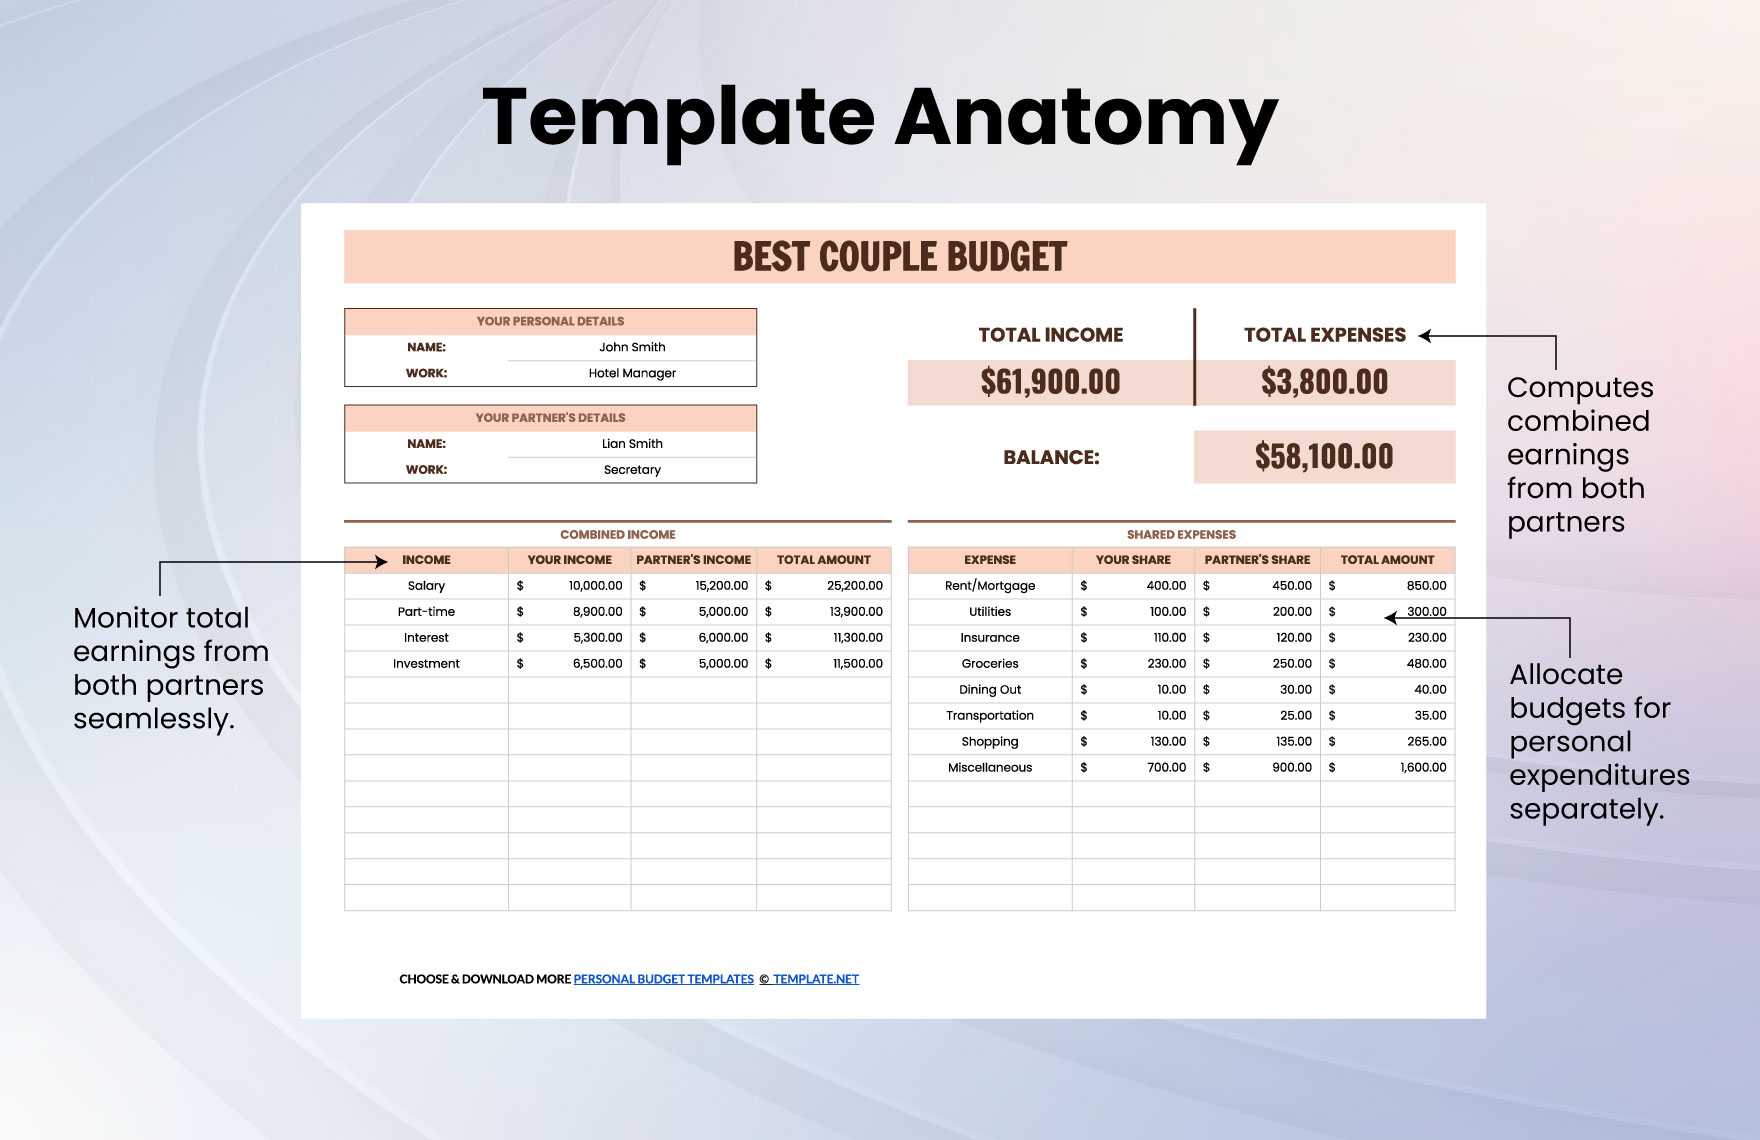 Best Couple Budget Template